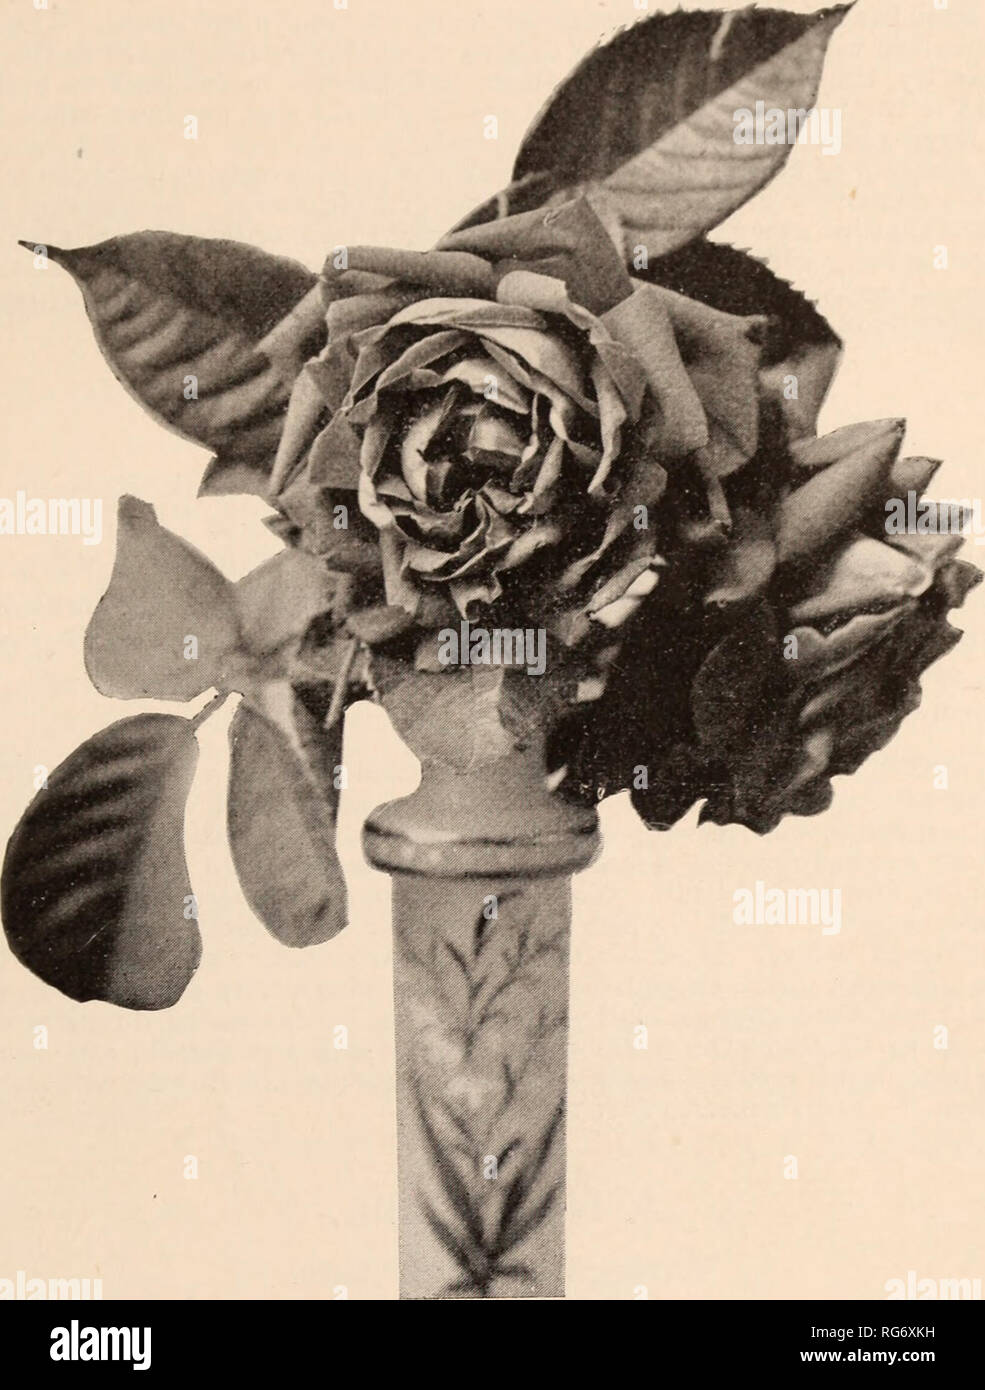 . The Burbank seed book / Luther Burbank Company.. Nursery Catalogue. New Creations in Fruits and Flowers.. J.—26940. Seedling Rose. J.—2(U)40. A most graceful and brilliantl}' colored Rose, much resembling Gen. Jacqueminot, but an improvement in man}^ respects. Twelve plants. Price, $300. Seedling Rose. u. HUi. Sa^tl^&quot;^ ^ Seedling of Hermosa and like it in its liabit of blooming constantly and even more abundantly. The blossoms are of a much clearer, richer pink aud stand upright instead of drooping. The bush is more compact; cuttings grow as readily as coleus, and often bloom when only  Stock Photo